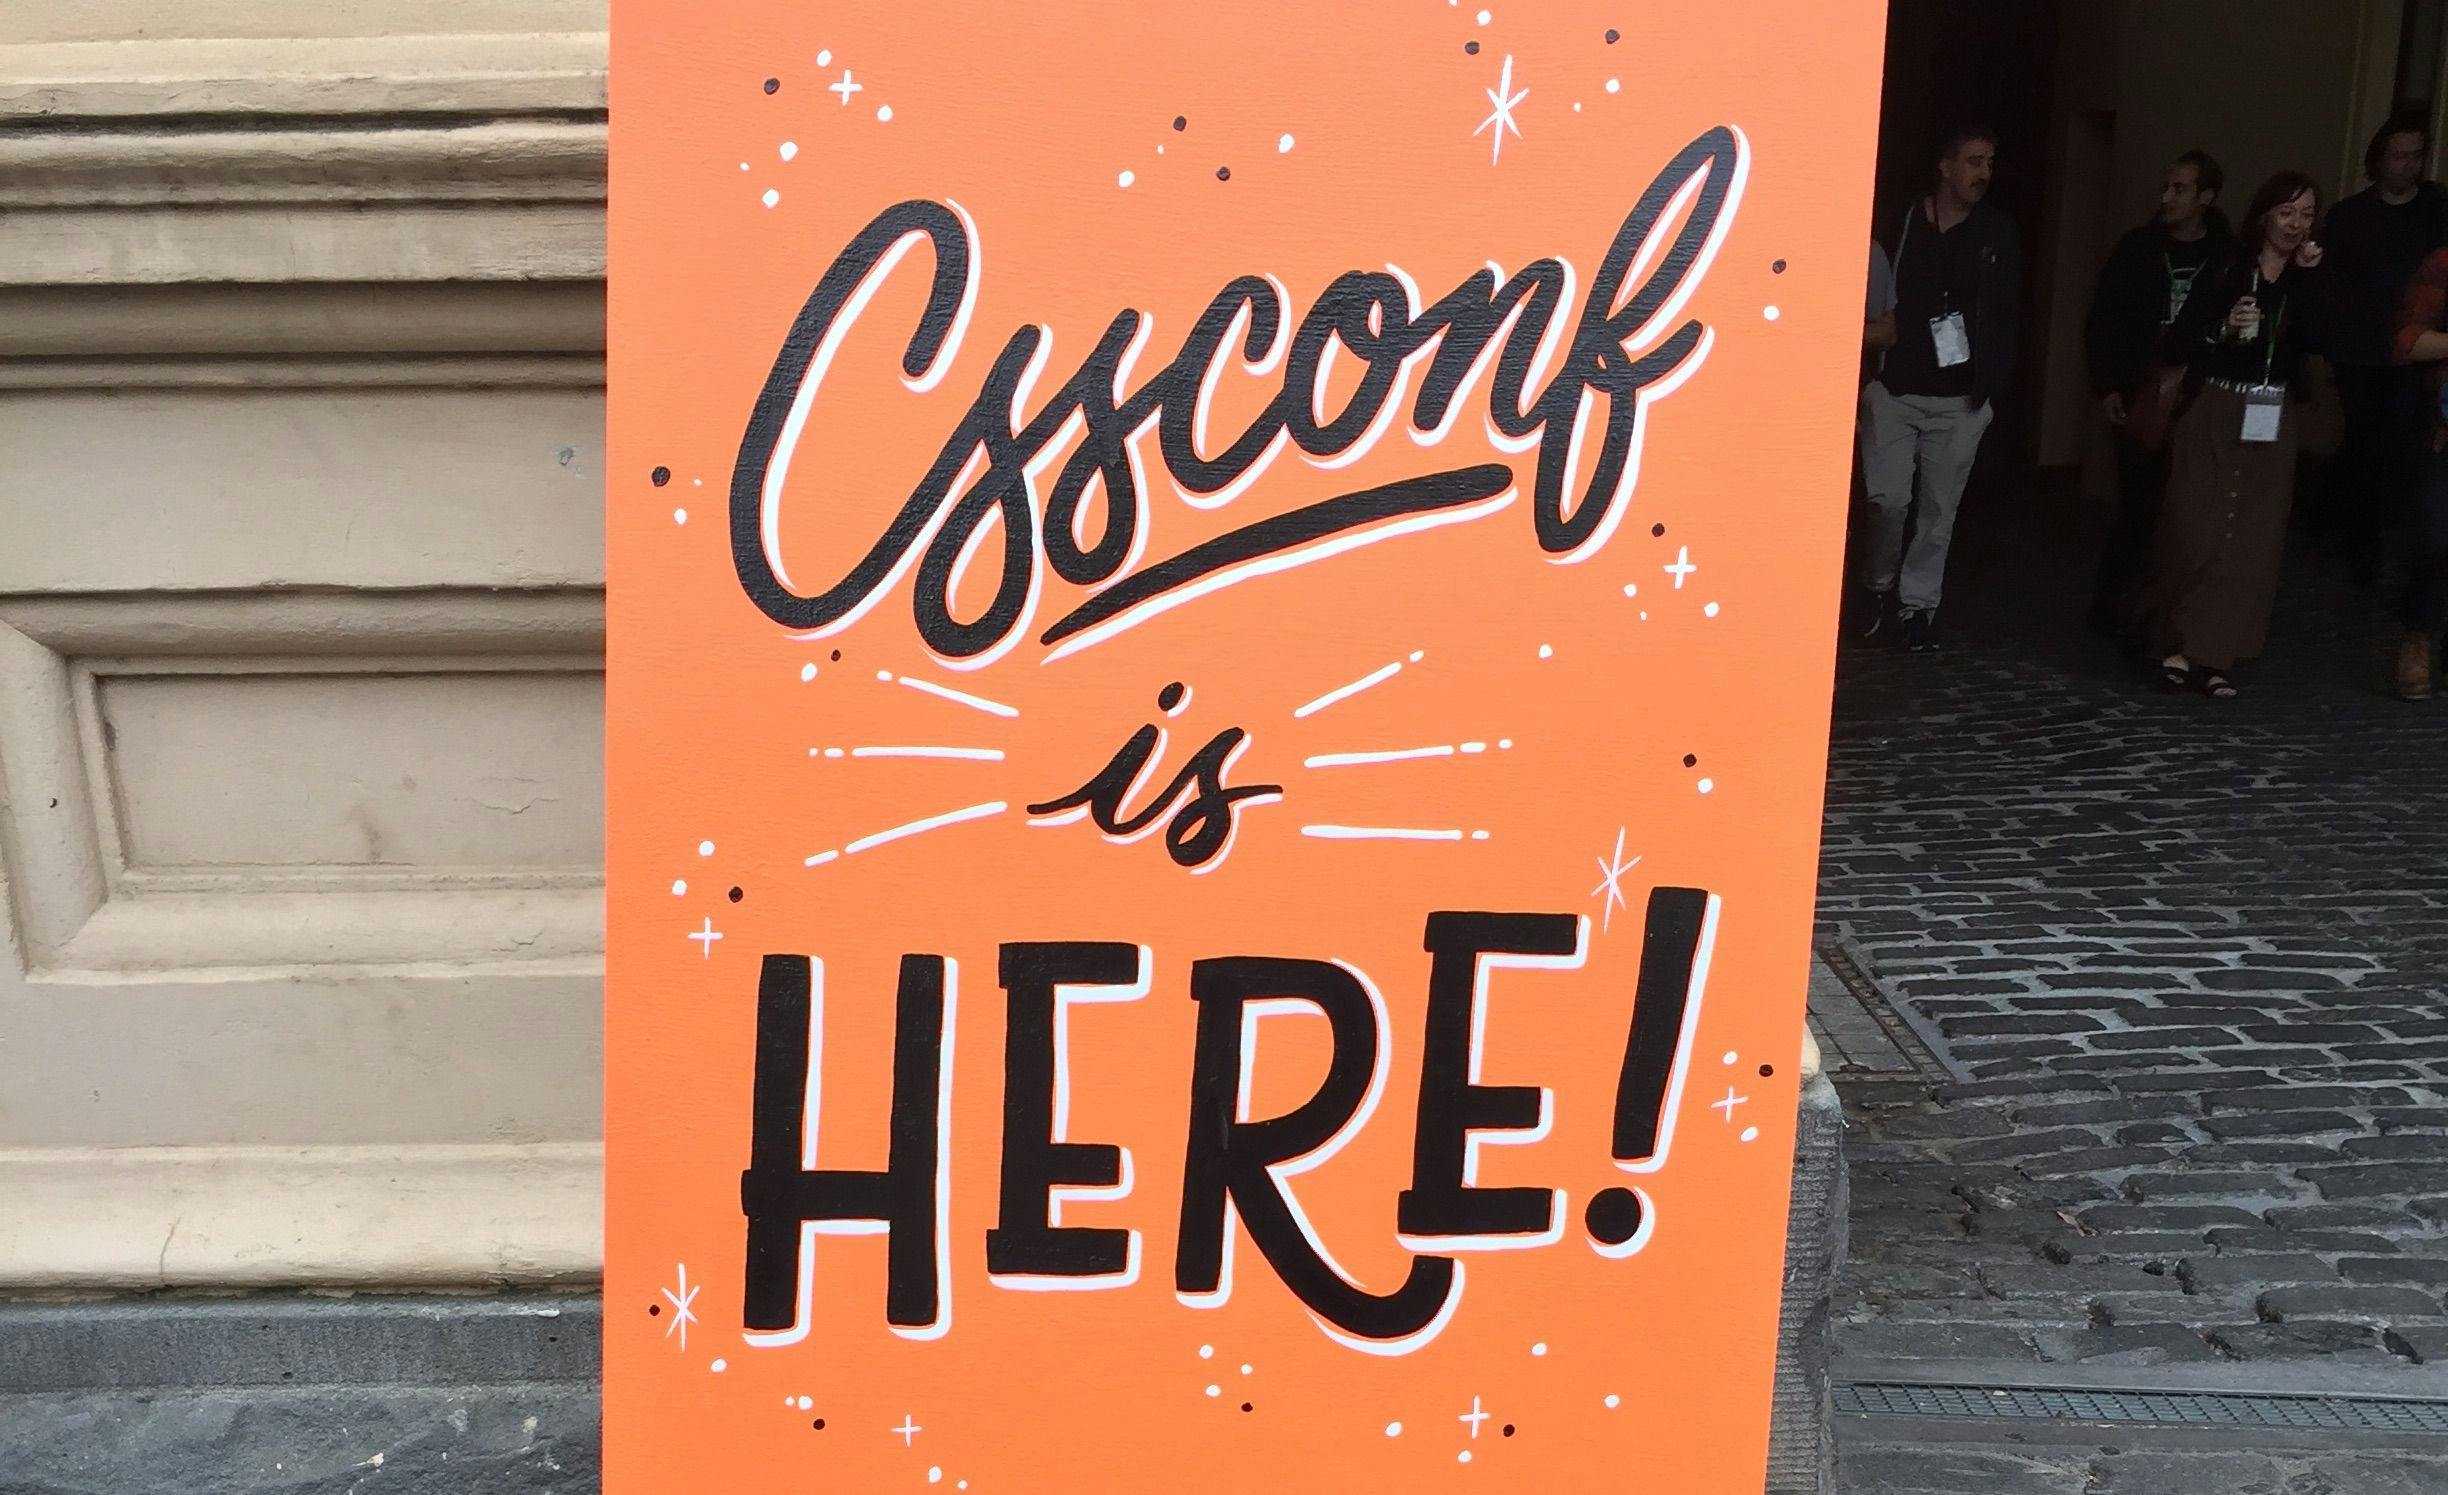 The CSSConf AU 2016 sign at the entrance